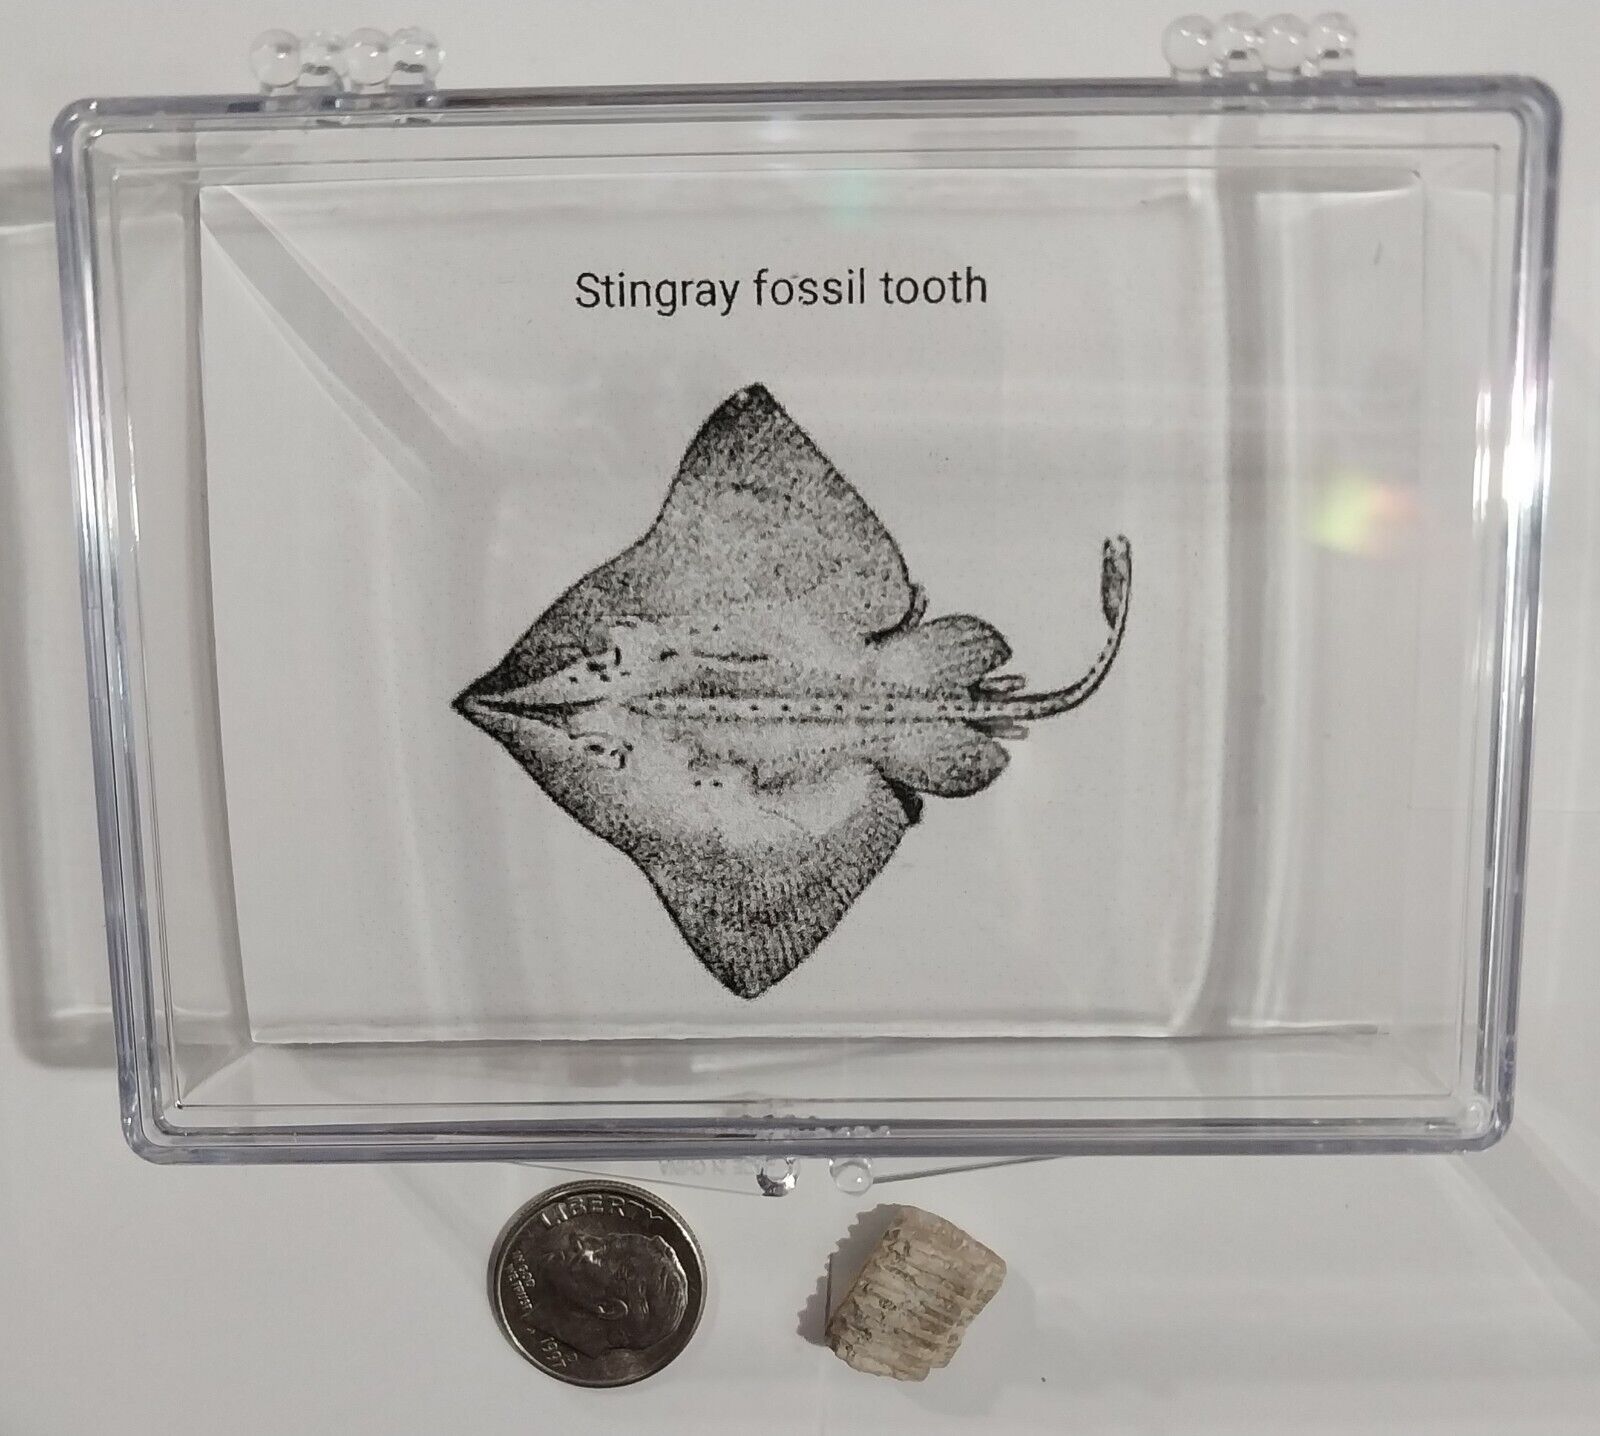 Stingray TOOTH REAL PRE-HISTORIC SHARK FOSSIL EXTINCT in display case